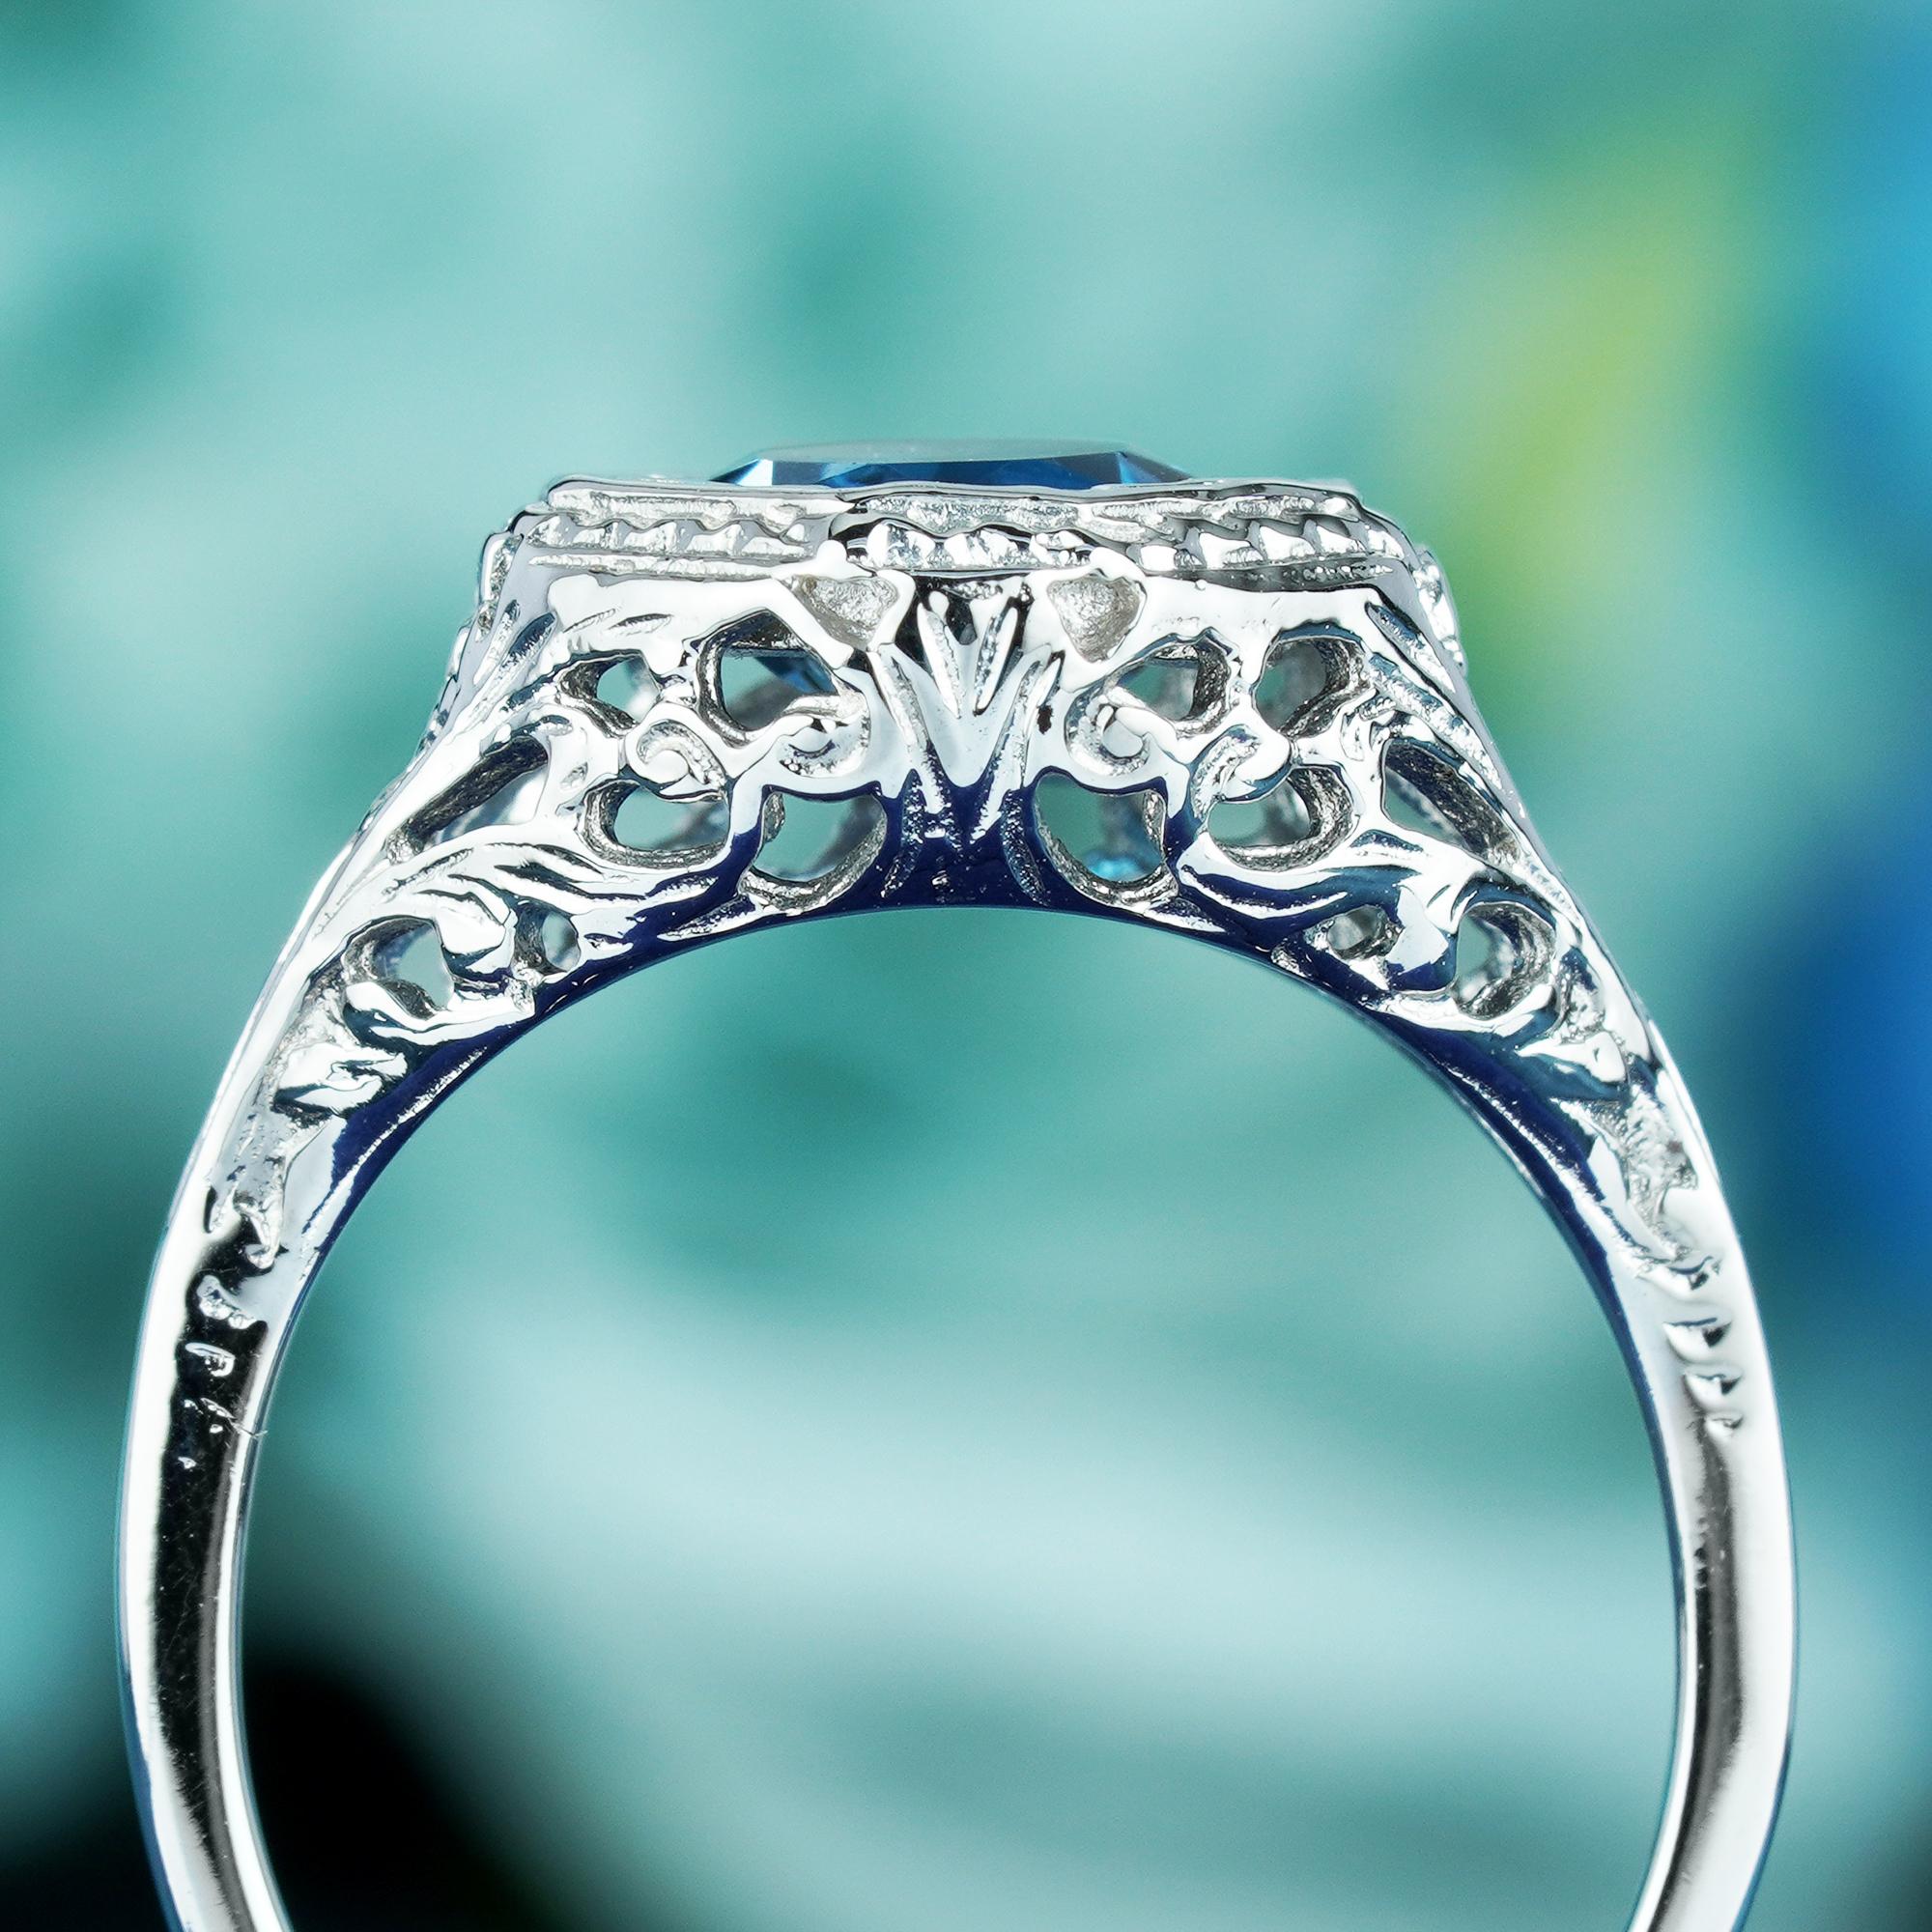 For Sale:  Natural London Blue Topaz Vintage Style Filigree Ring in Solid 9K White Gold 5